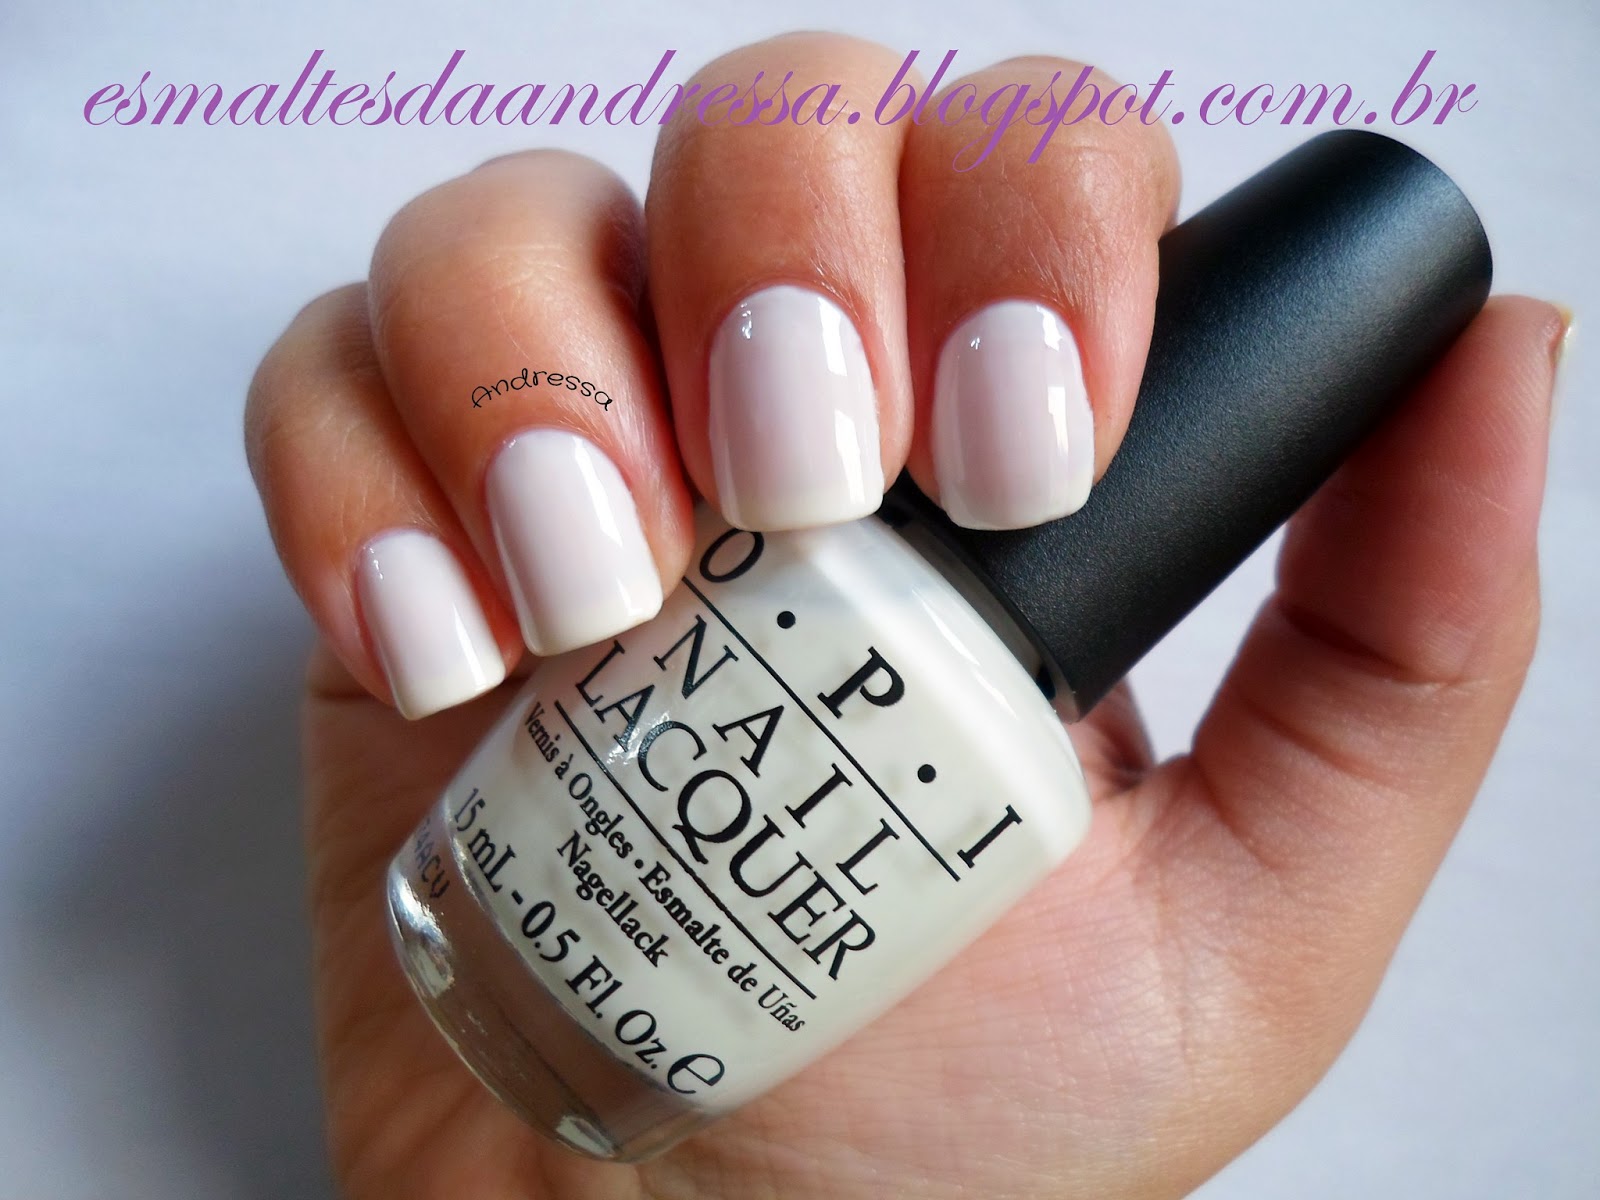 5. OPI Nail Lacquer in "Funny Bunny" - wide 1